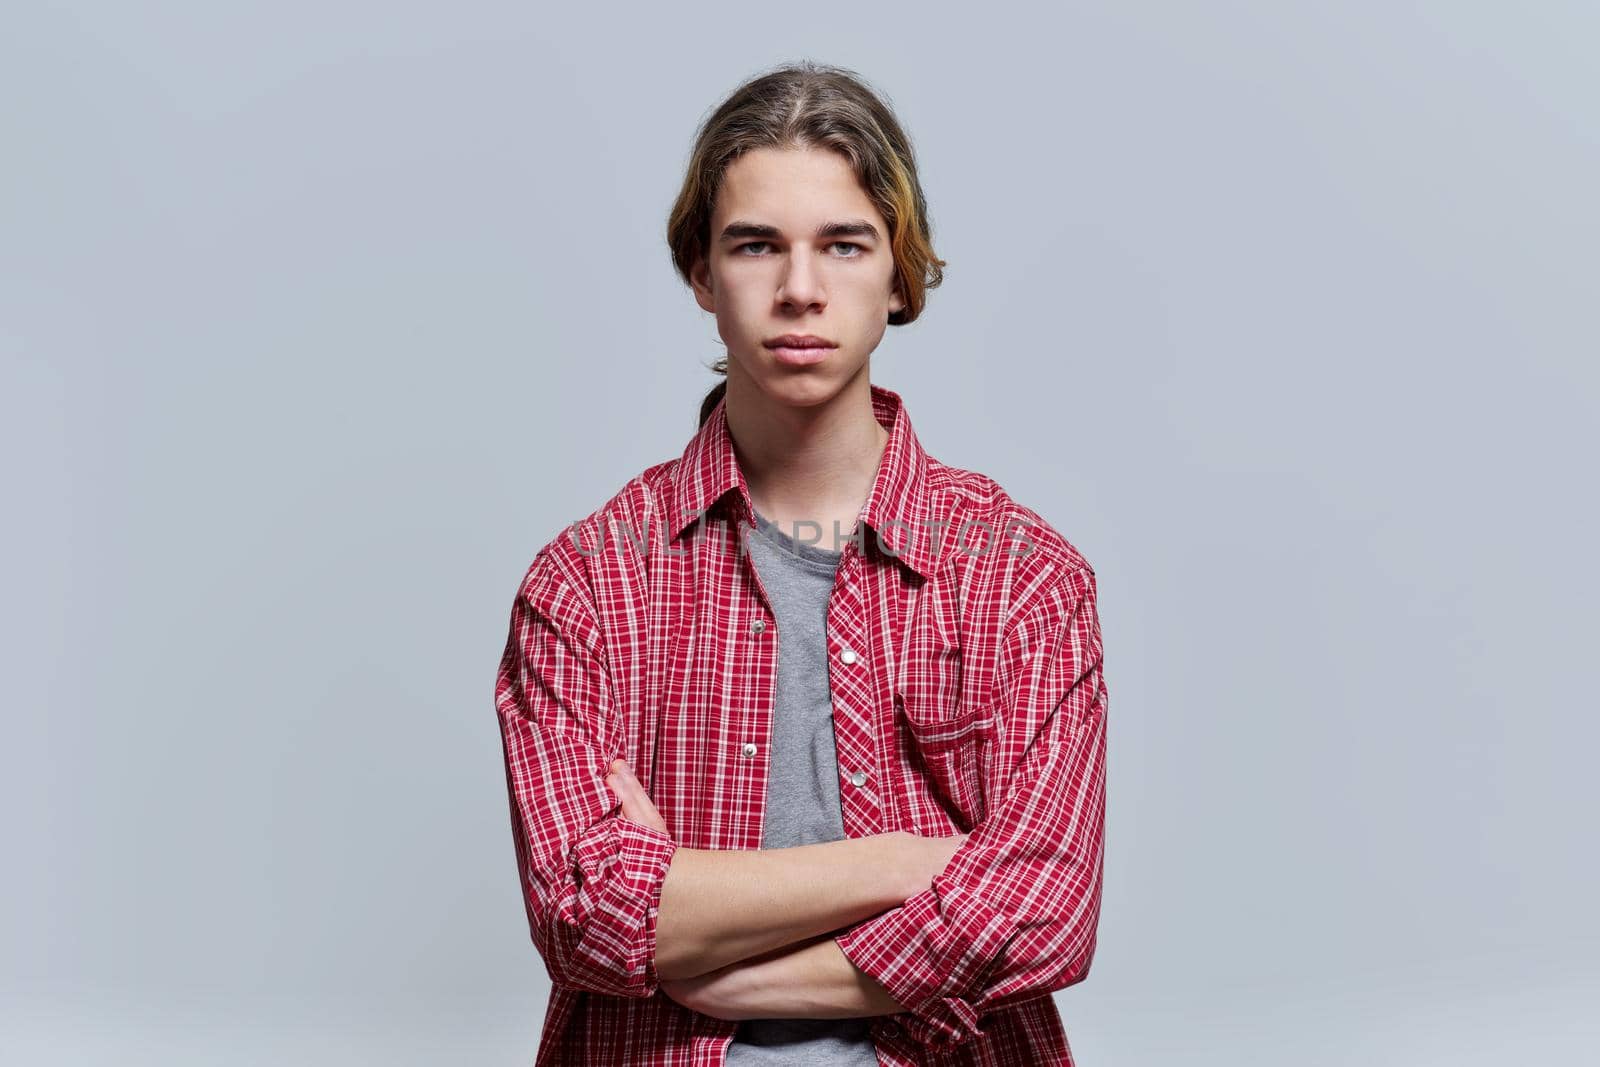 Portrait of serious guy teenager with crossed arms, hipster teen male 15, 16 years old with long hair looking at camera on light background